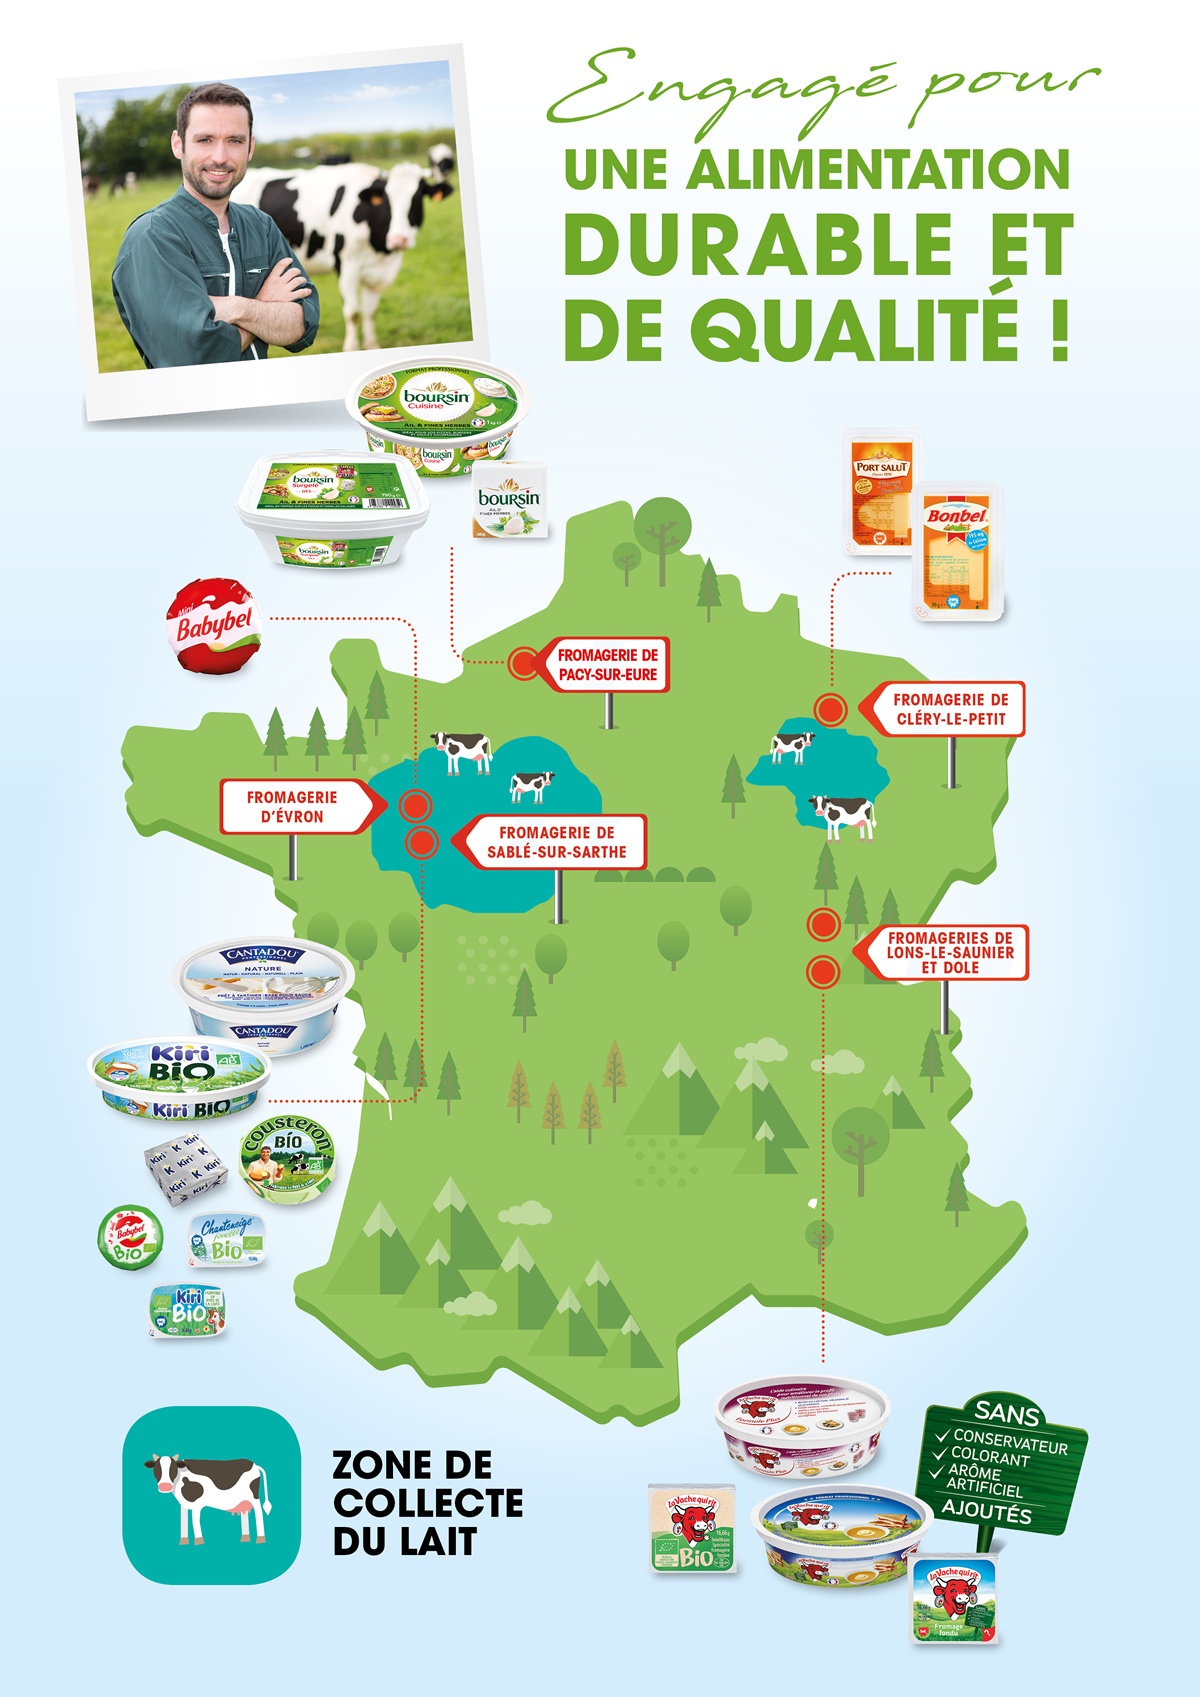 Fromageries 100% françaises - Bel Foodservice